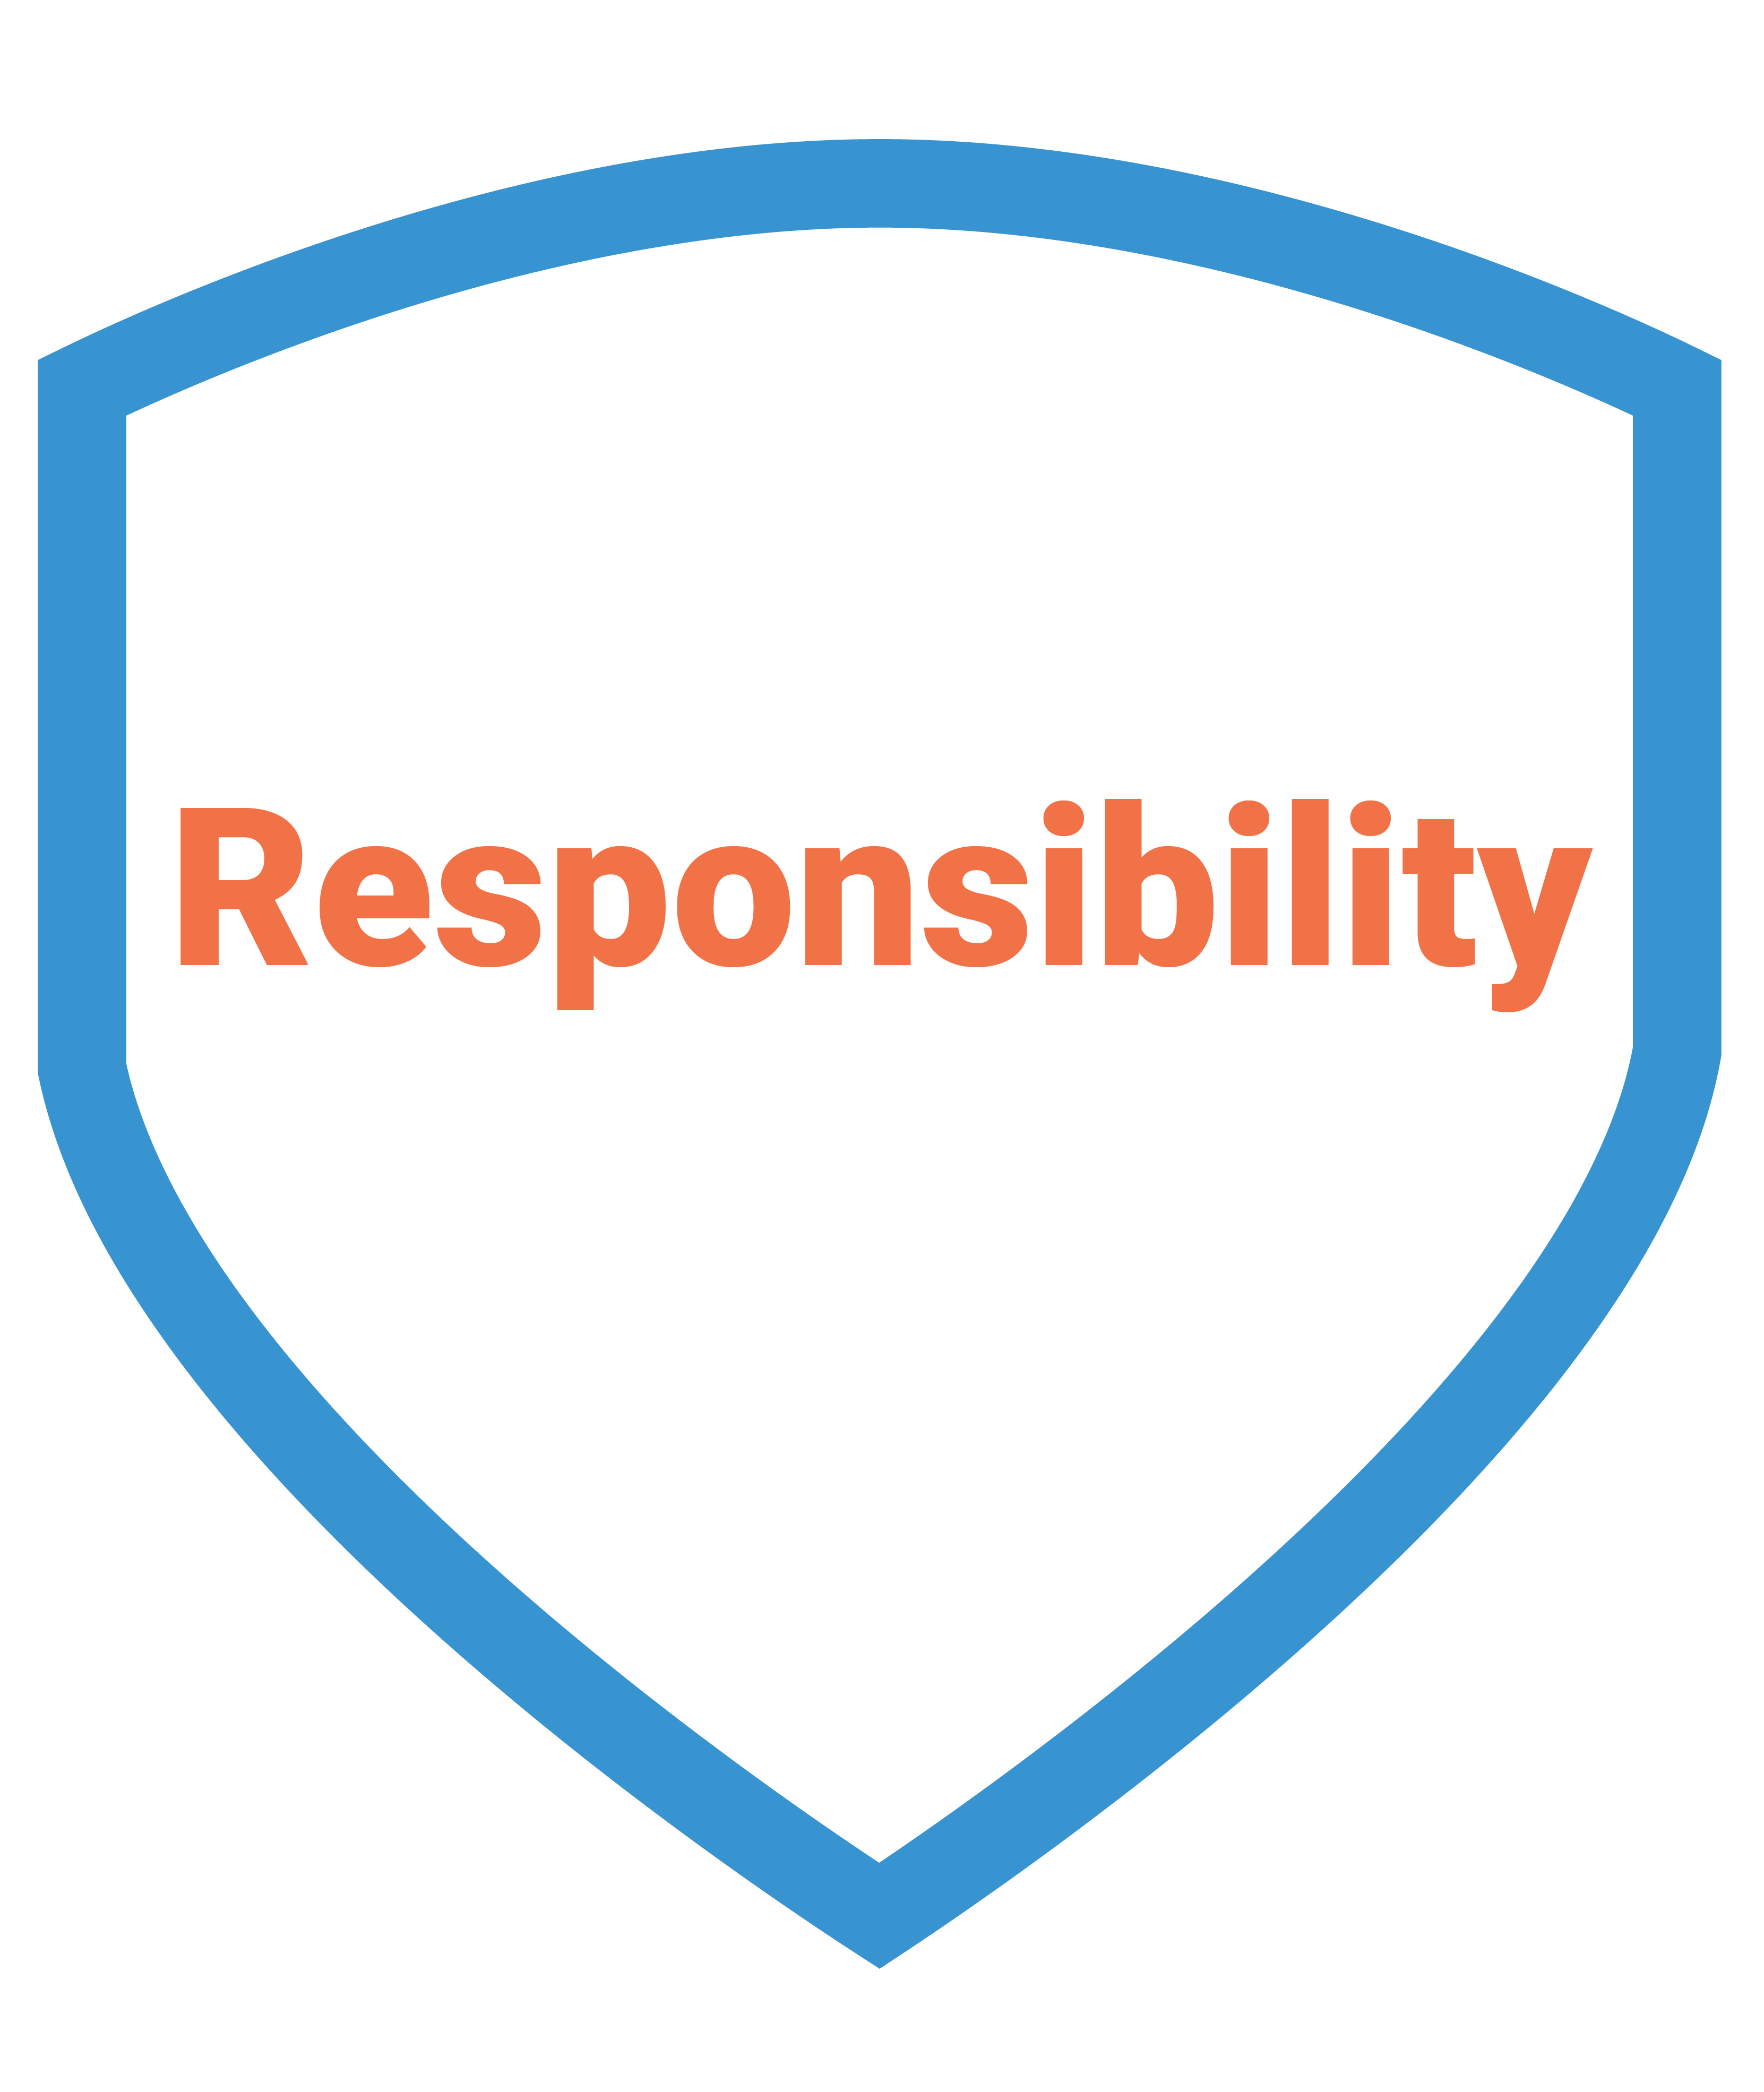 About the company - Our values - The word "Responsibility" in orange text surrounded by a blue shield outline.